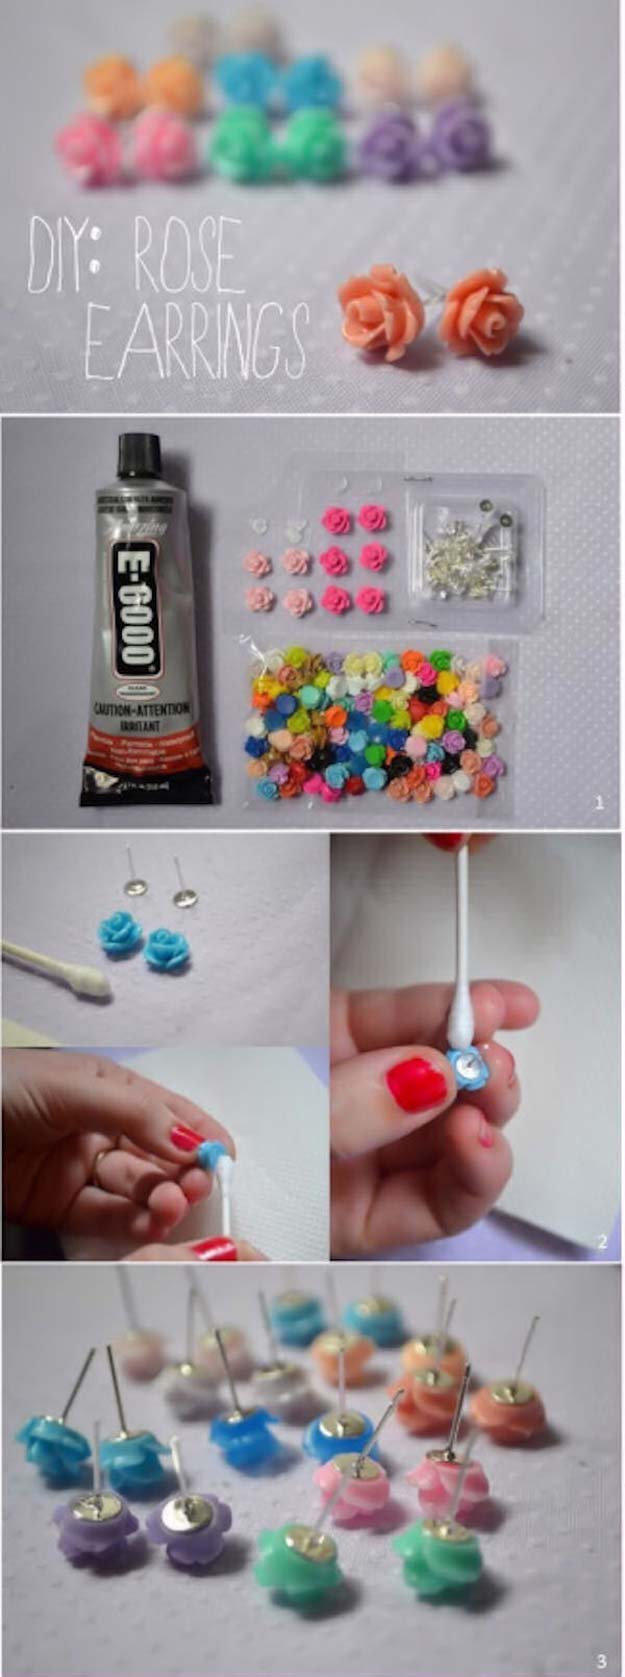 DIY Earrings and Homemade Jewelry Projects - Rose Earrings - Easy Studs, Ideas with Beads, Dangle Earring Tutorials, Wire, Feather, Simple Boho, Handmade Earring Cuff, Hoops and Cute Ideas for Teens and Adults #diygifts #diyteens #teengifts #teencrafts #diyearrings